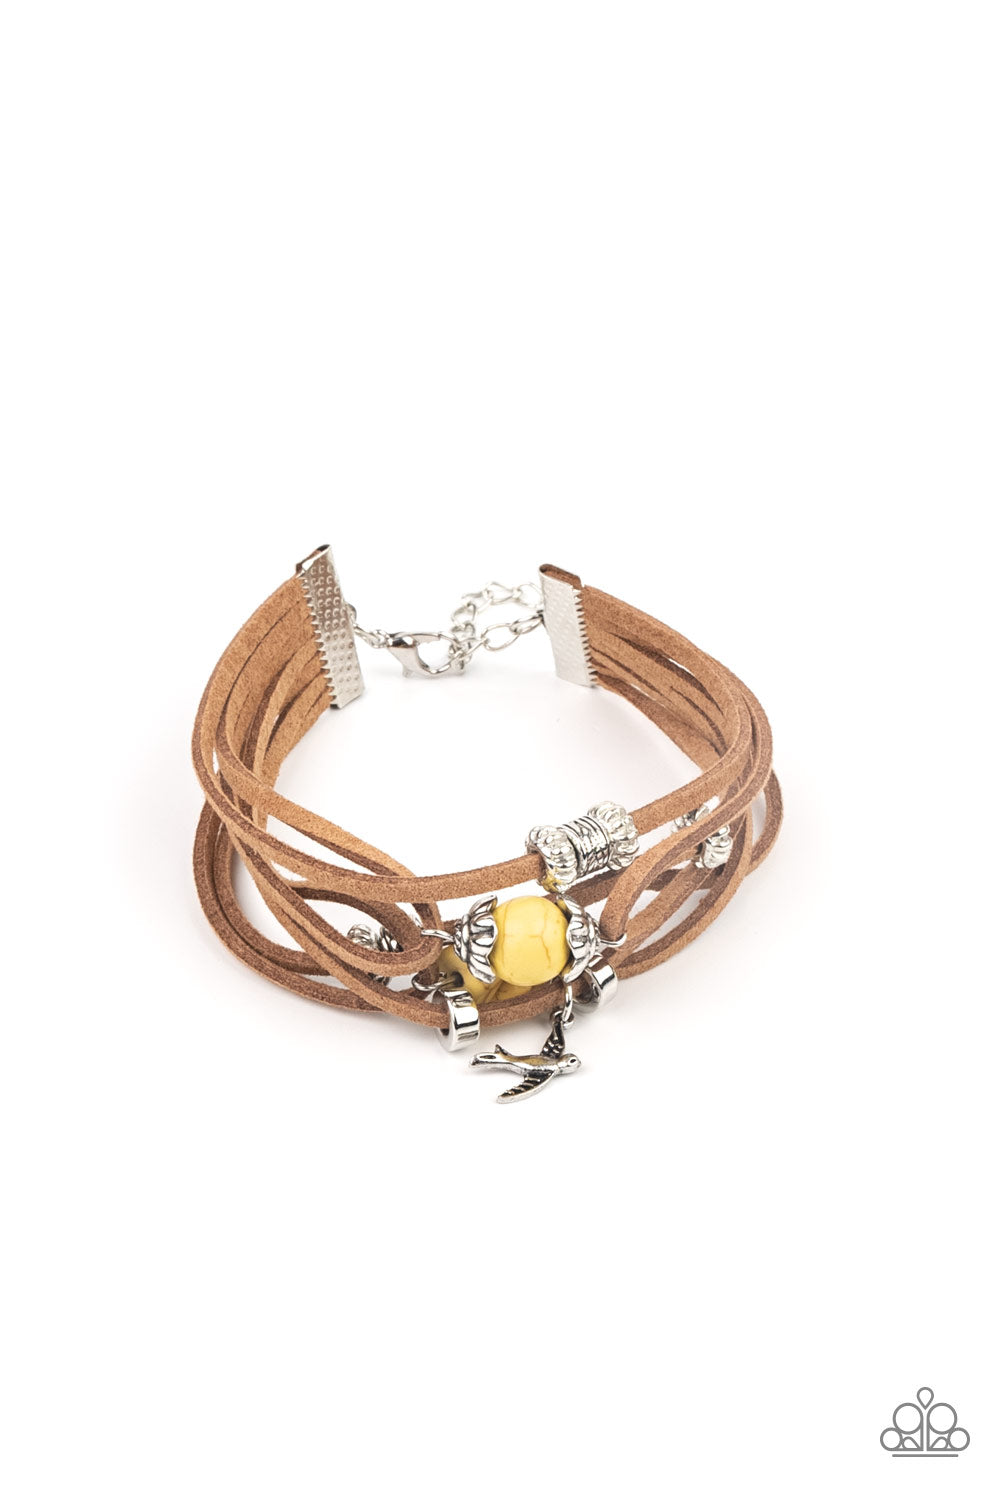 Infused with a dainty silver bird charm, dainty strands of brown suede are adorned in mismatched silver accents and yellow stones for an earthy layered look. Features an adjustable clasp closure.